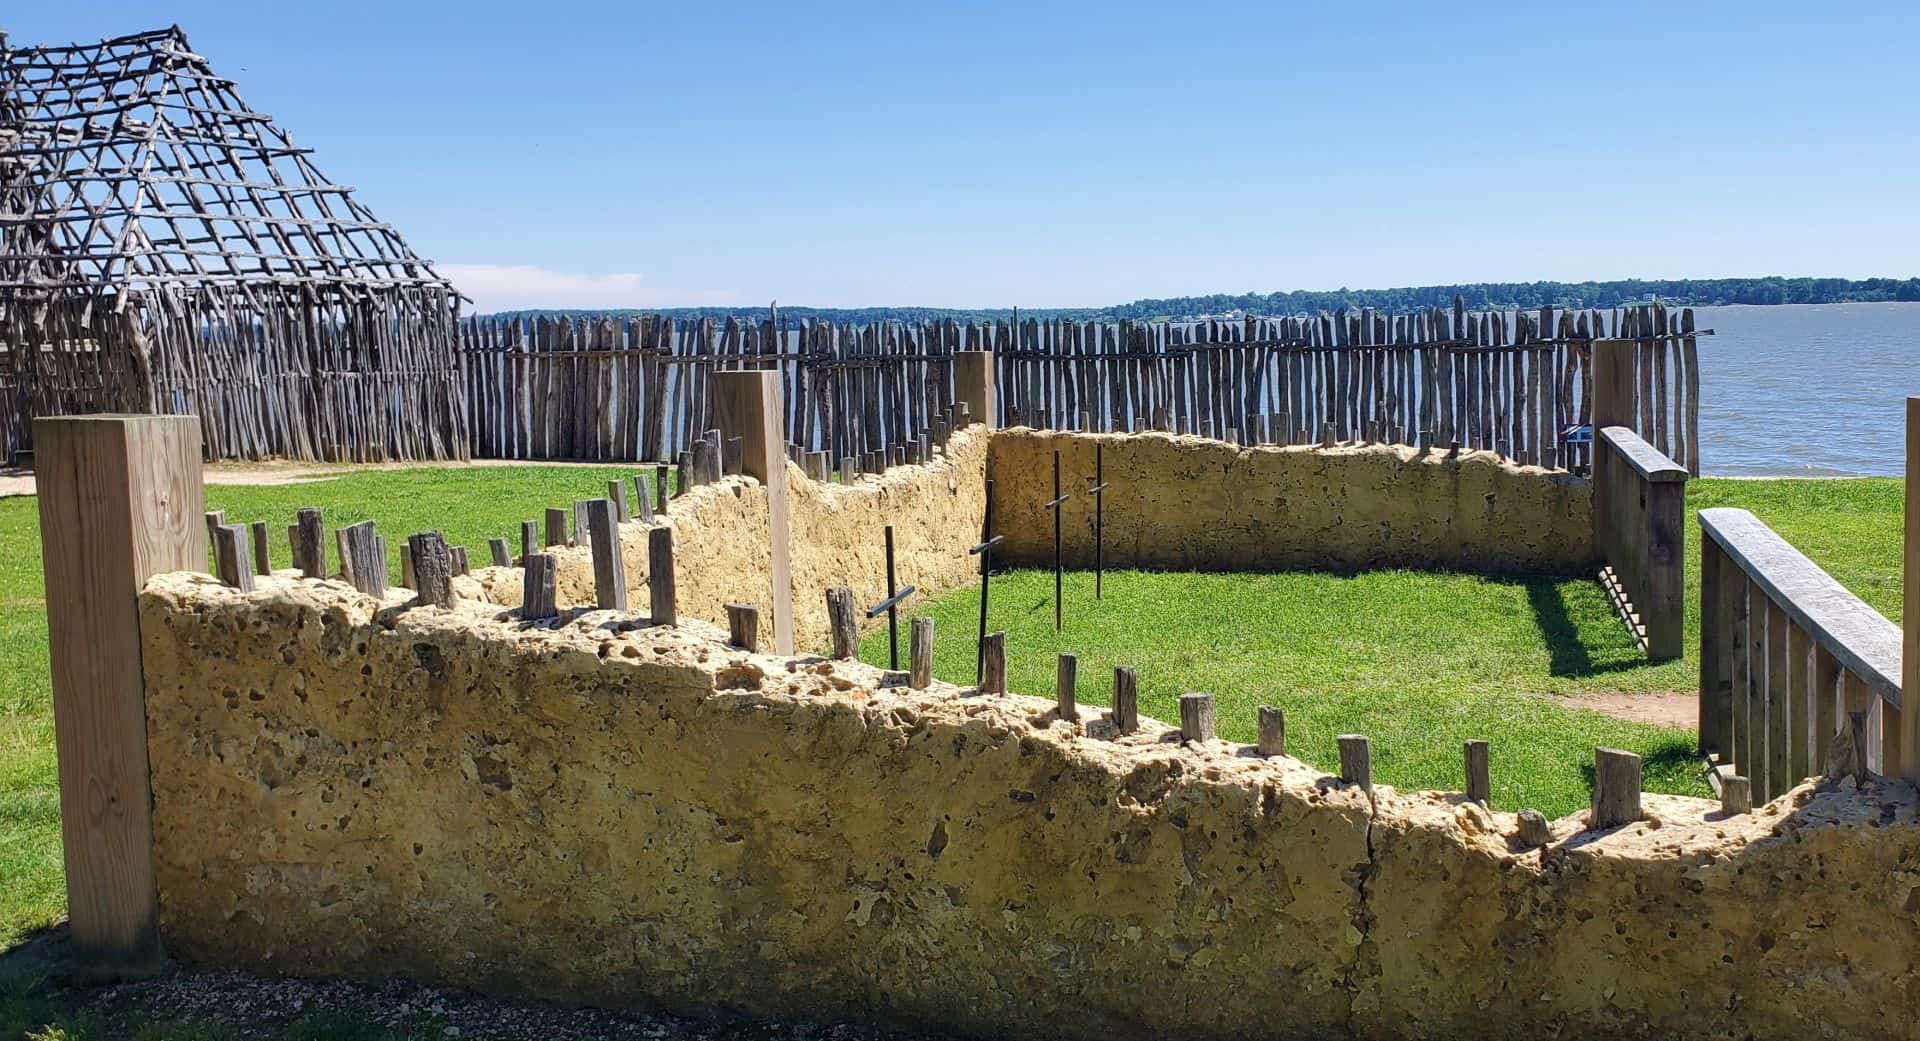 <p>Historic Jamestown marks the English settlement in North America. Visitors can delve into the settlement’s remnants, which includes the foundations of structures like forts, churches, and residences. The museum showcases artifacts from that era, such as tools, weapons, and household objects.</p>